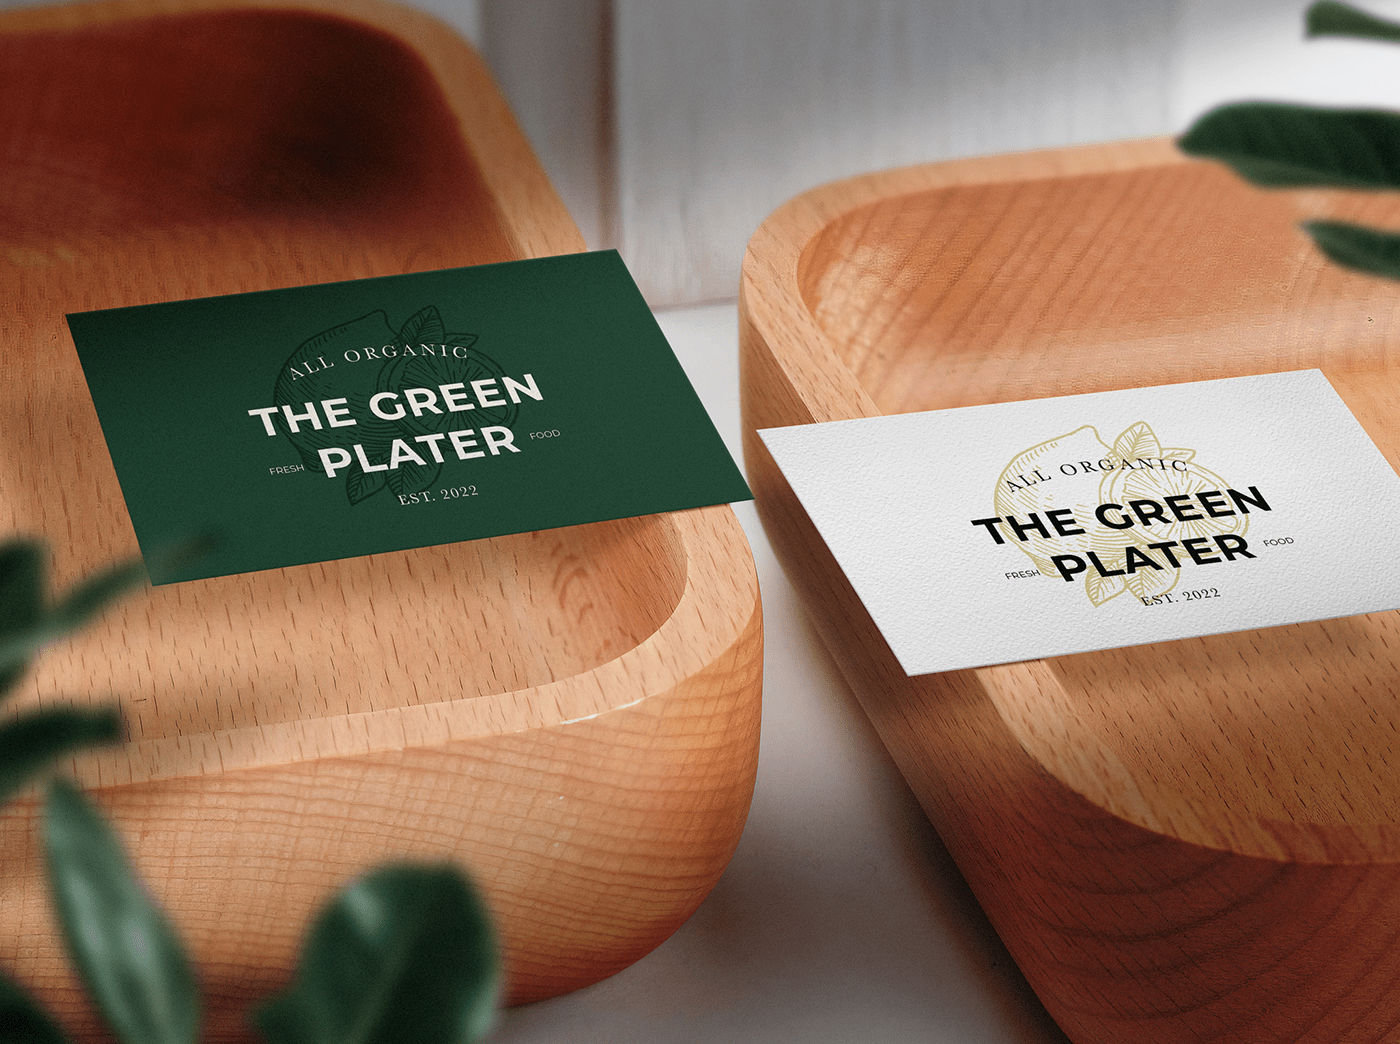 The Green Plater